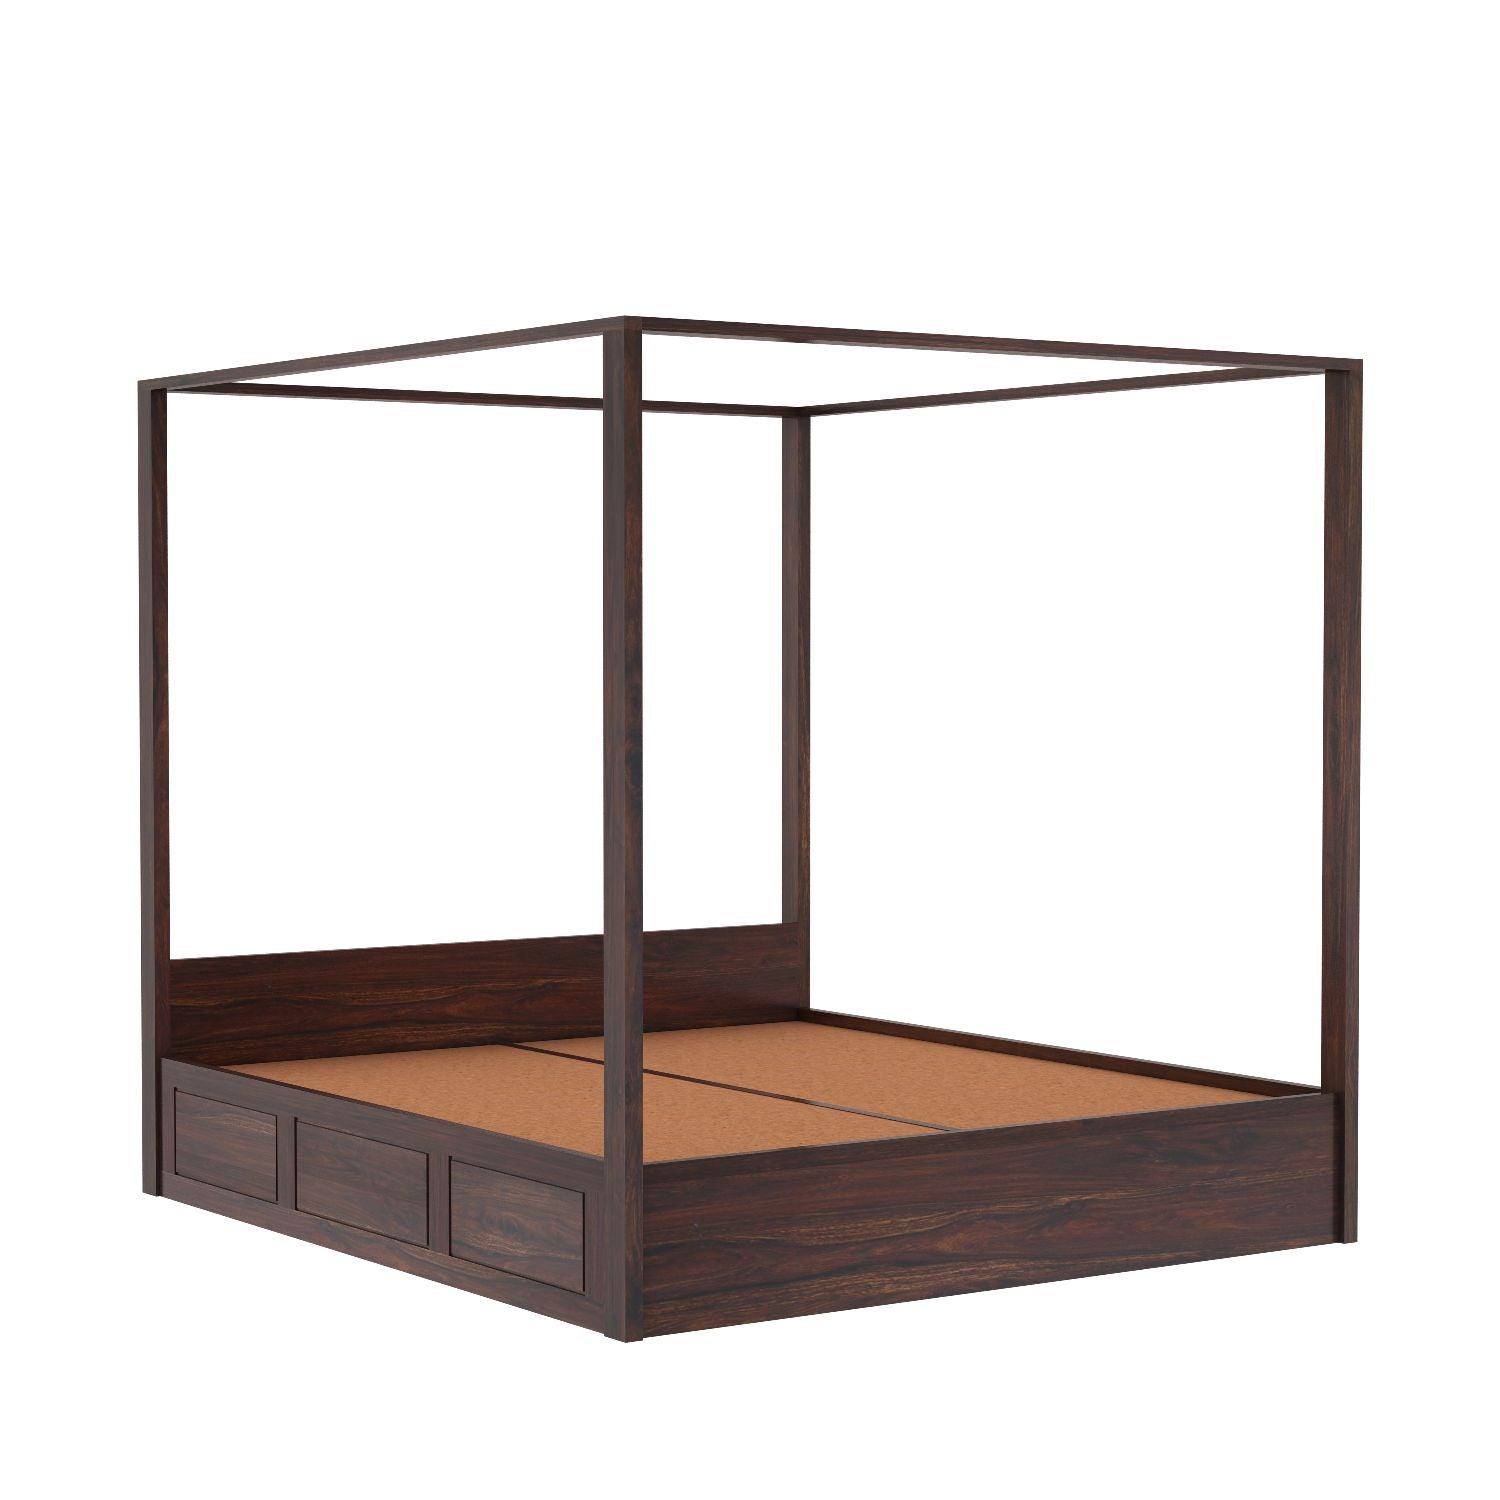 Solivo Solid Sheesham Wood Poster Bed With Box Storage (King Size, Walnut Finish)